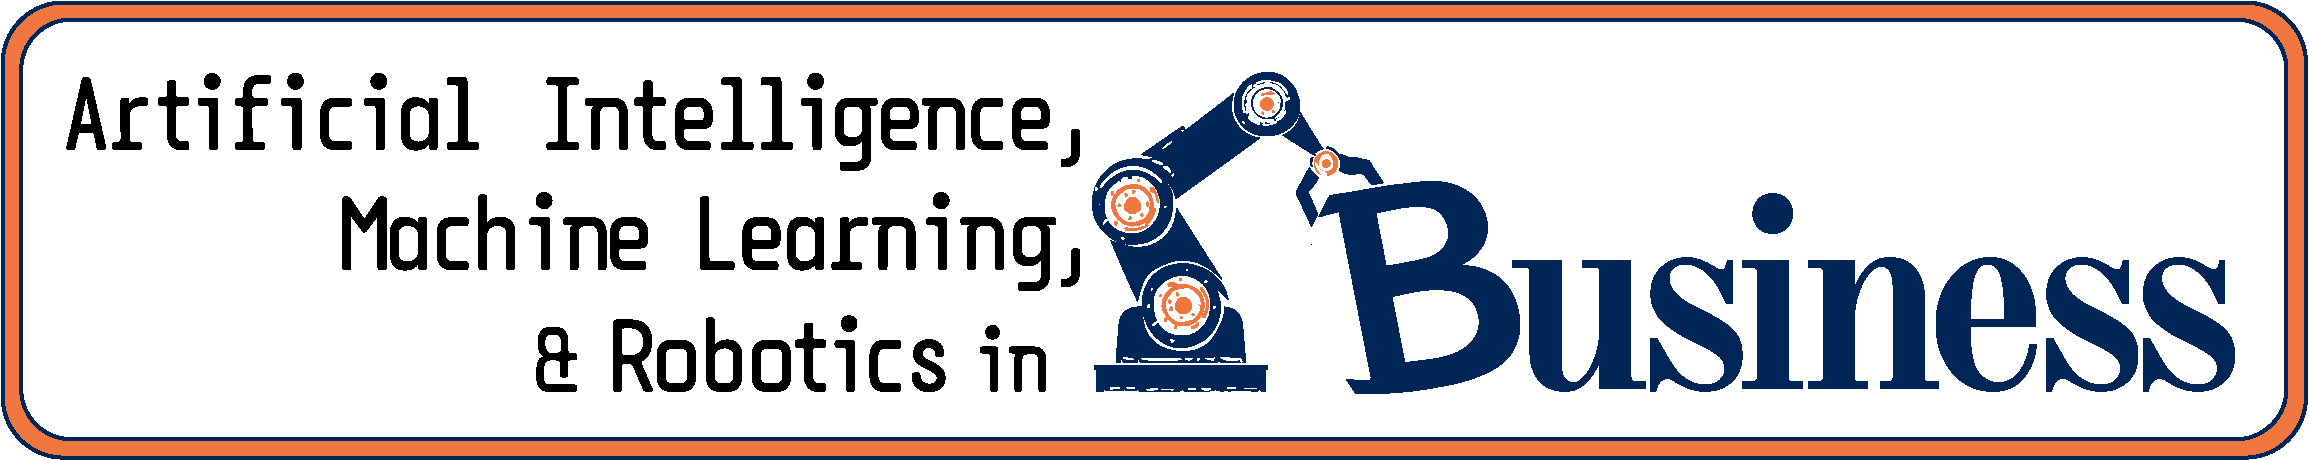 Artificial Intelligence, Machine Learning, & Robotics in Business logo with a blue and orange robotic arm placing the letter "B" into the word "Business"